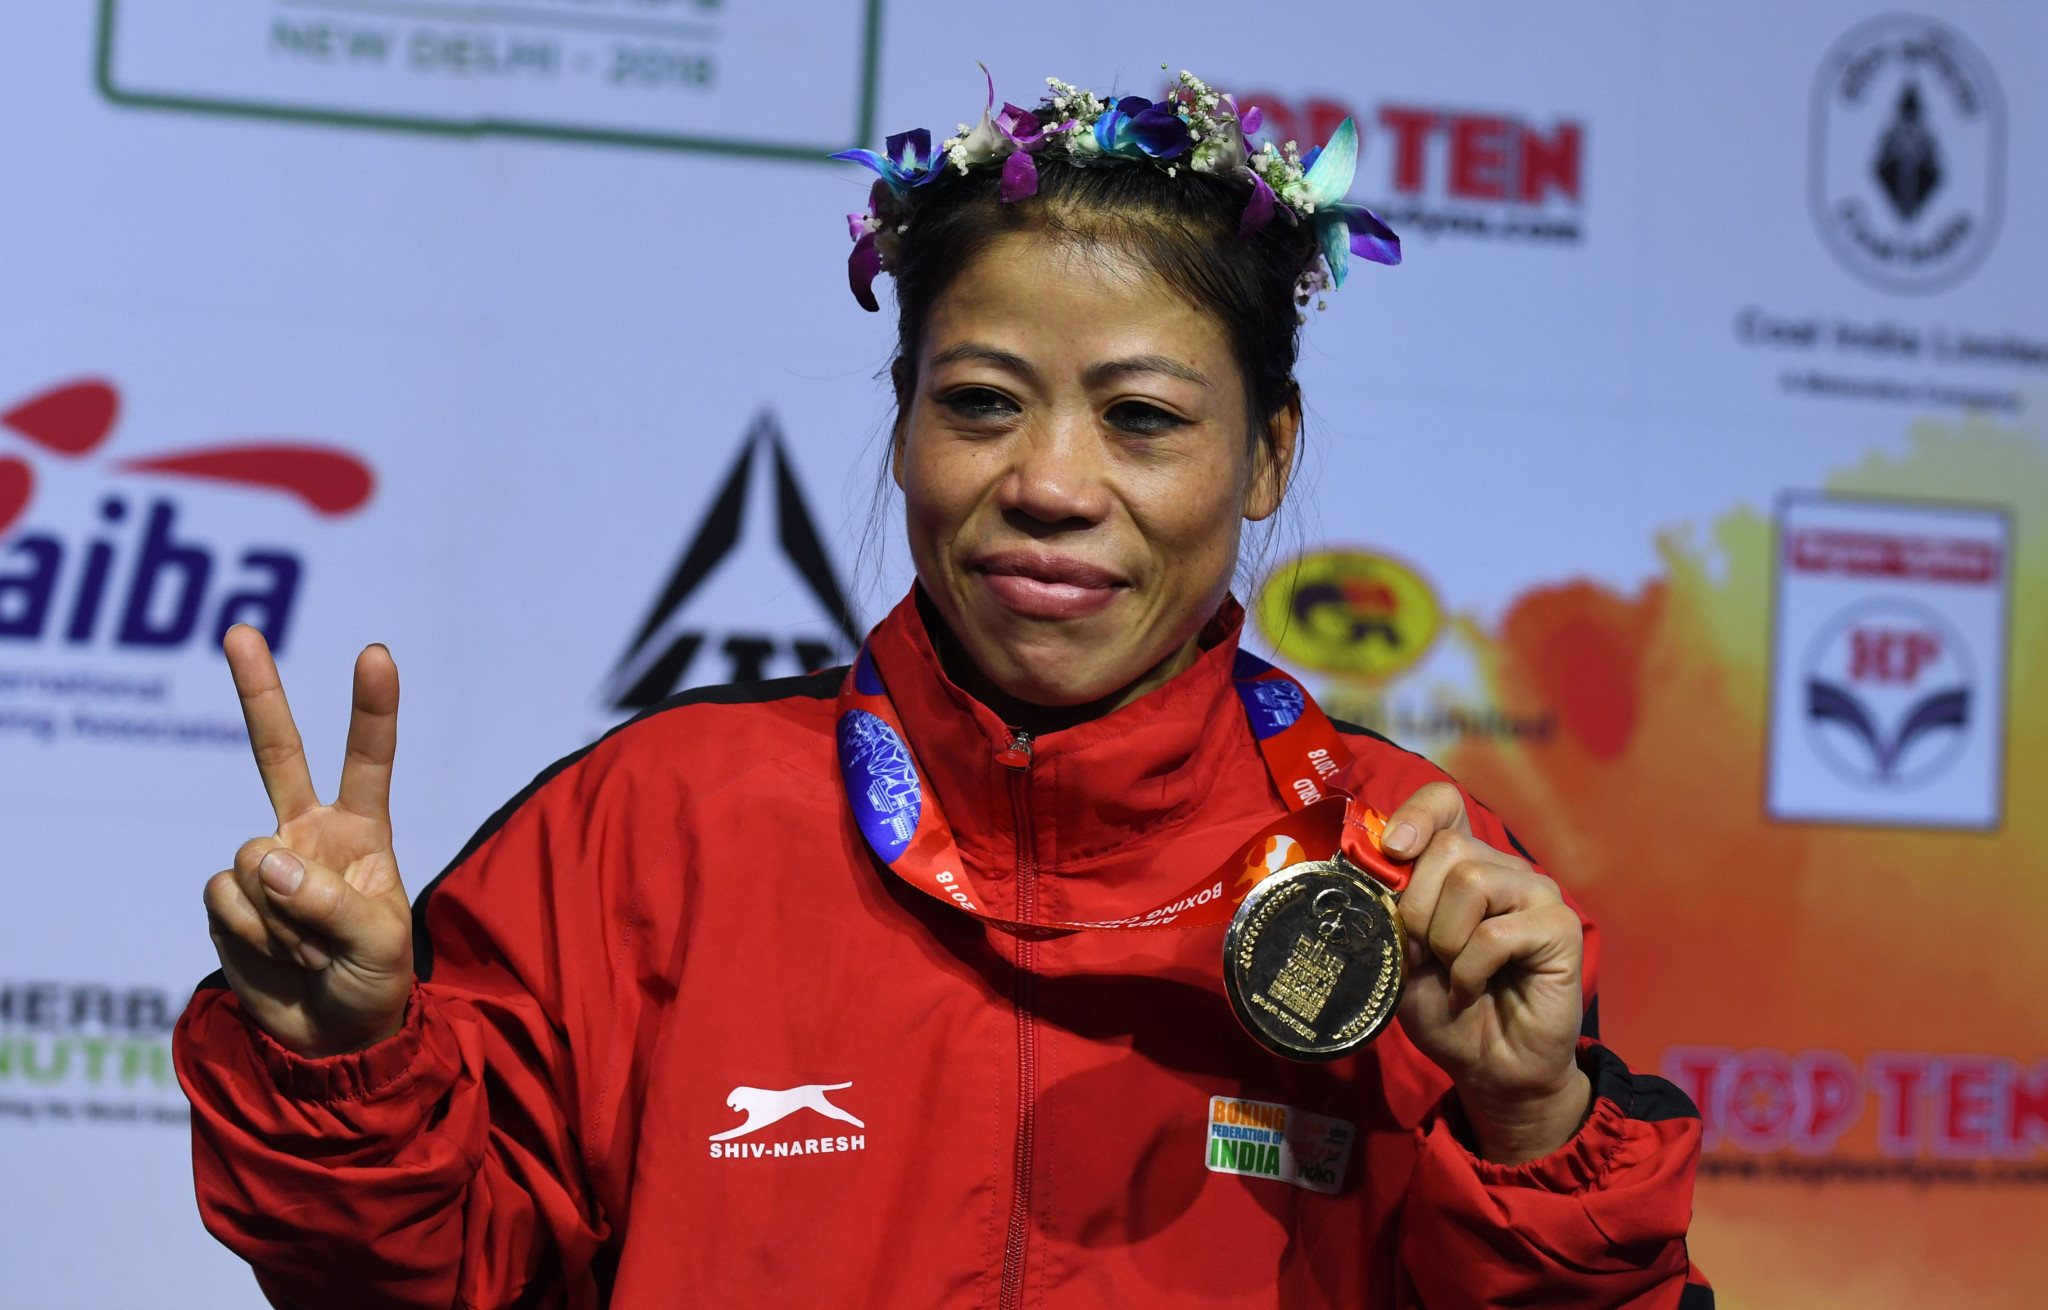 India's Mary Kom will be seeking her seventh world title, this time in the flyweight division ©Getty Images